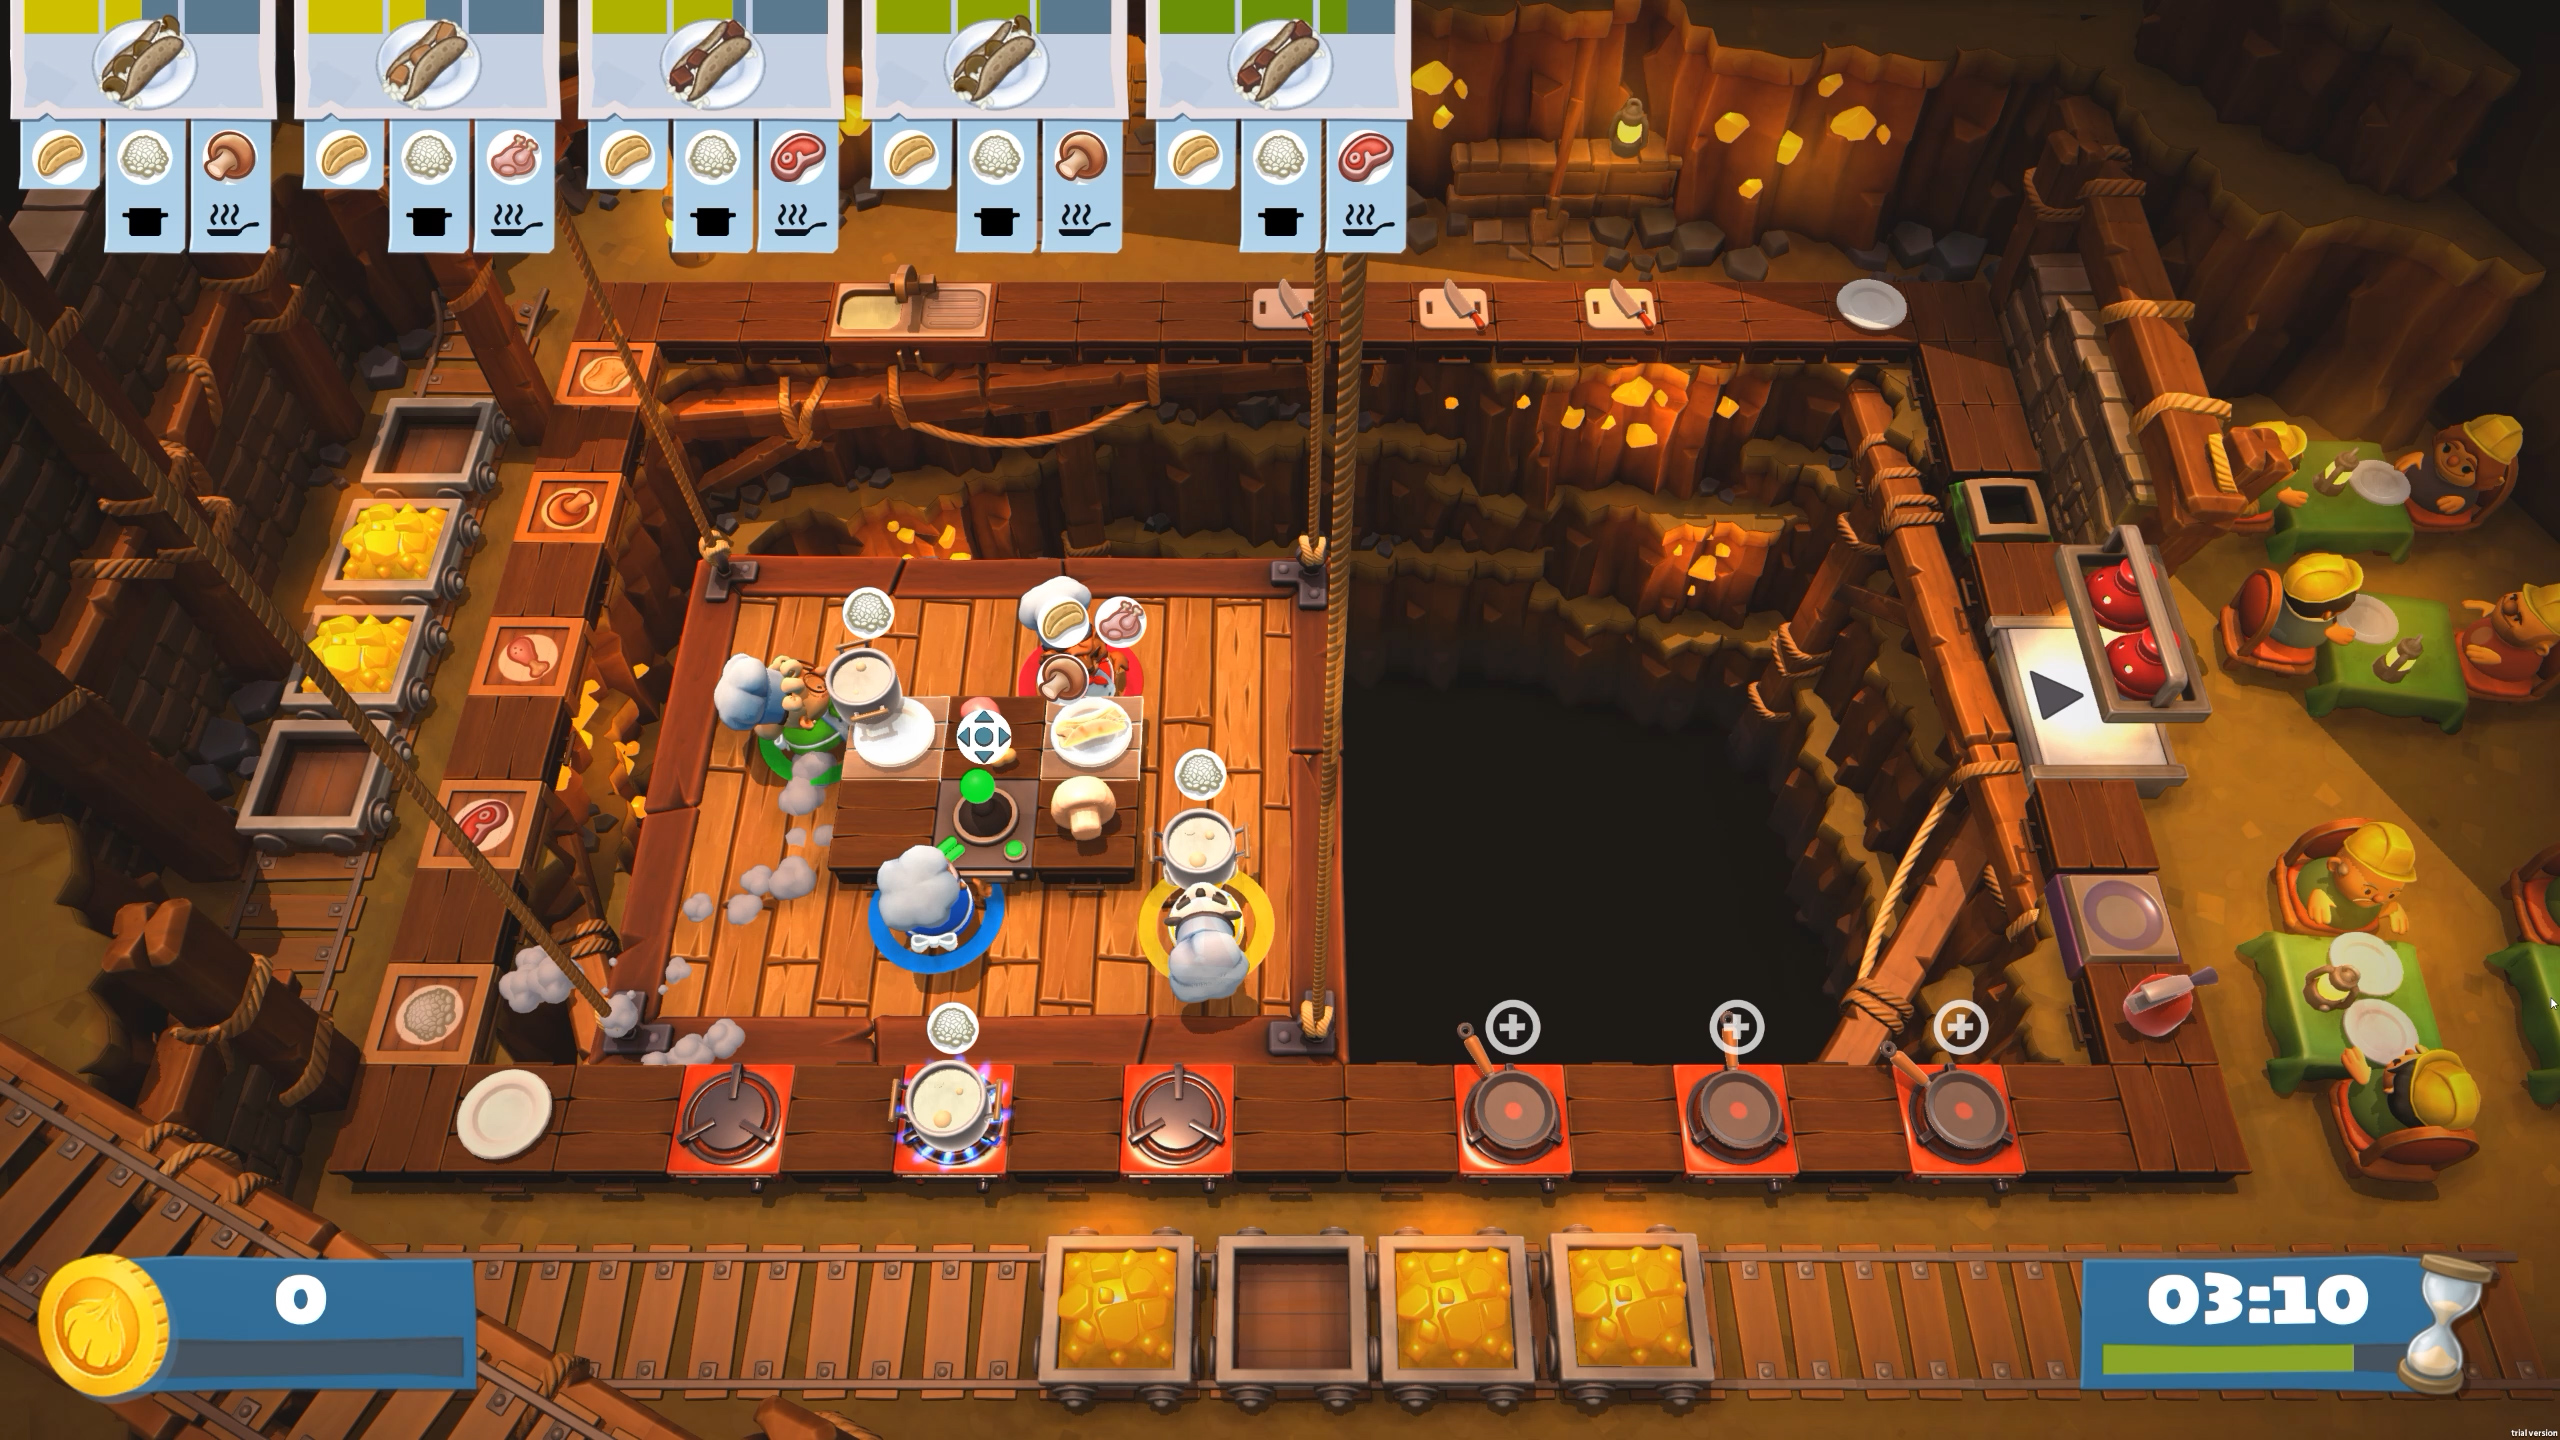 Overcooked! 2 for Xbox One - image 4 of 12